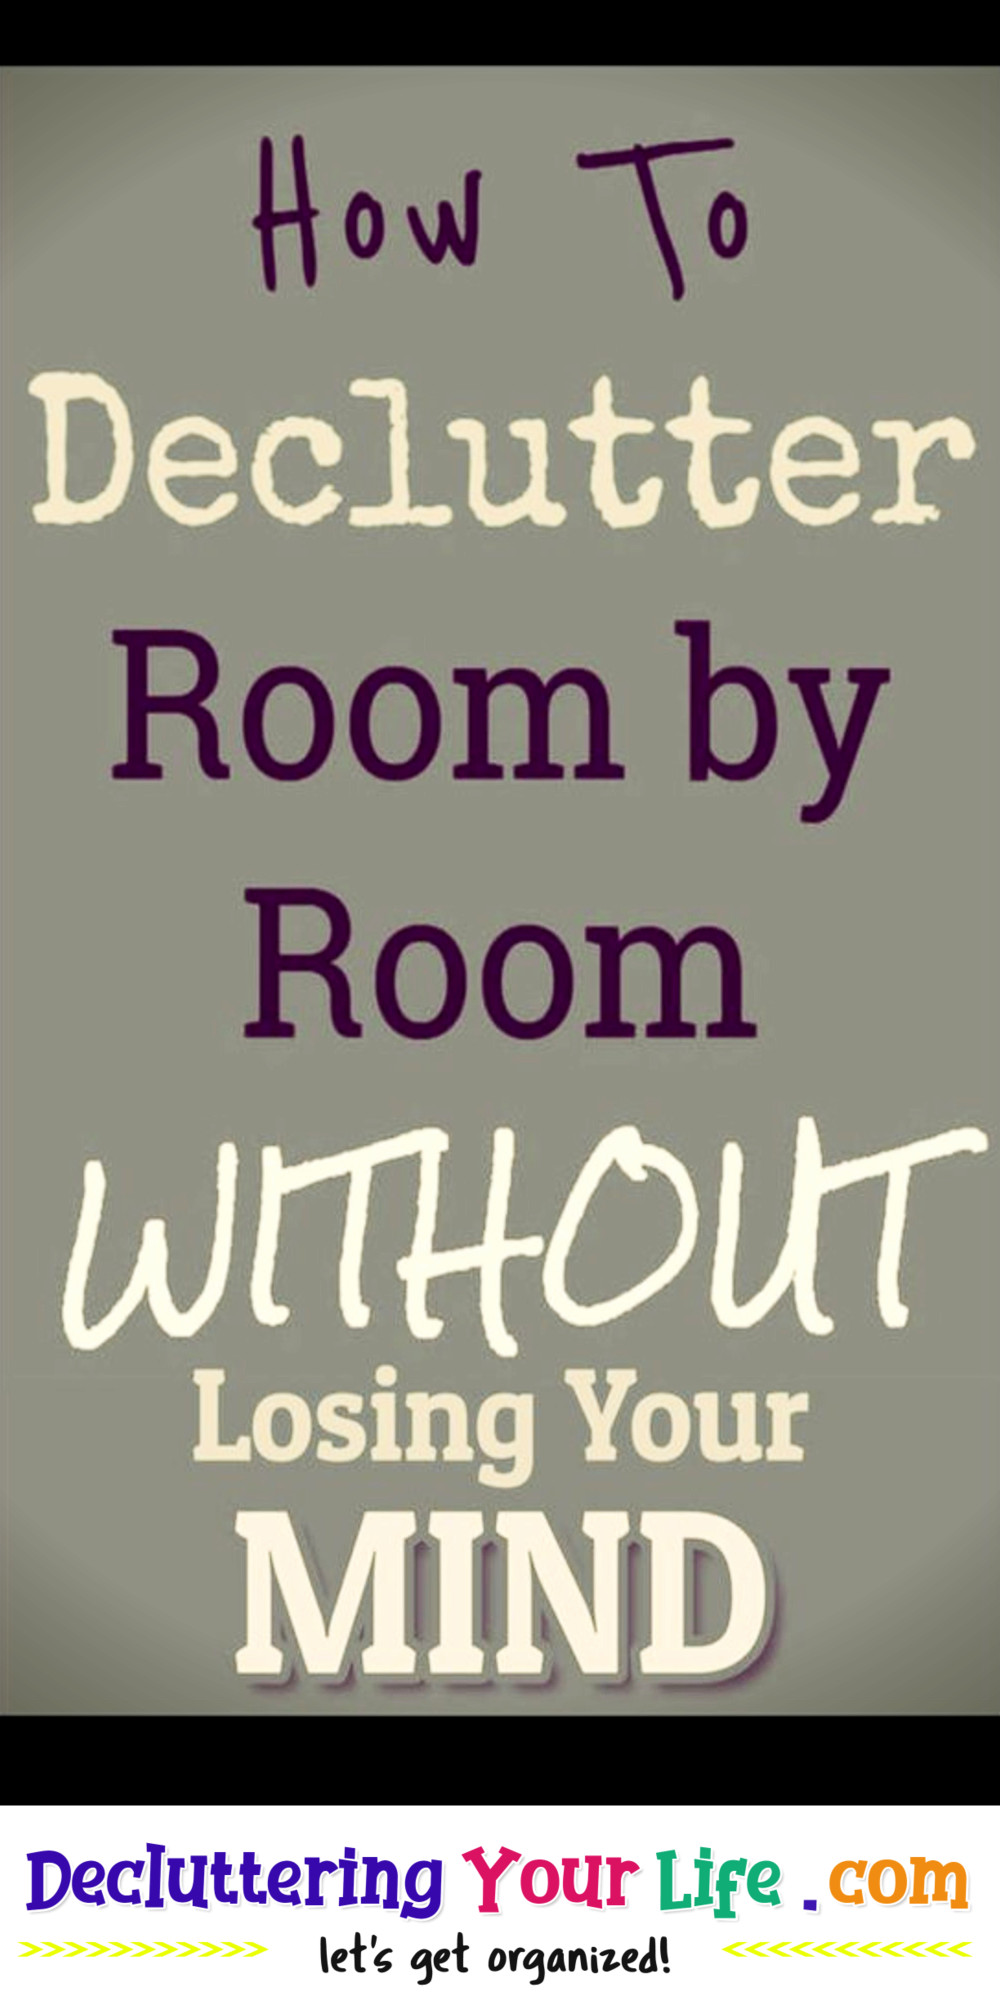 How To Declutter Your Home Room By Room - Tips from professional organizers: organizing ideas, declutter and organize and decluttering ideas when feeling overwhelmed, how to organize your home, get organized at home, storage and organization ideas for the home, getting organized help, tips and tricks plus home organization hacks